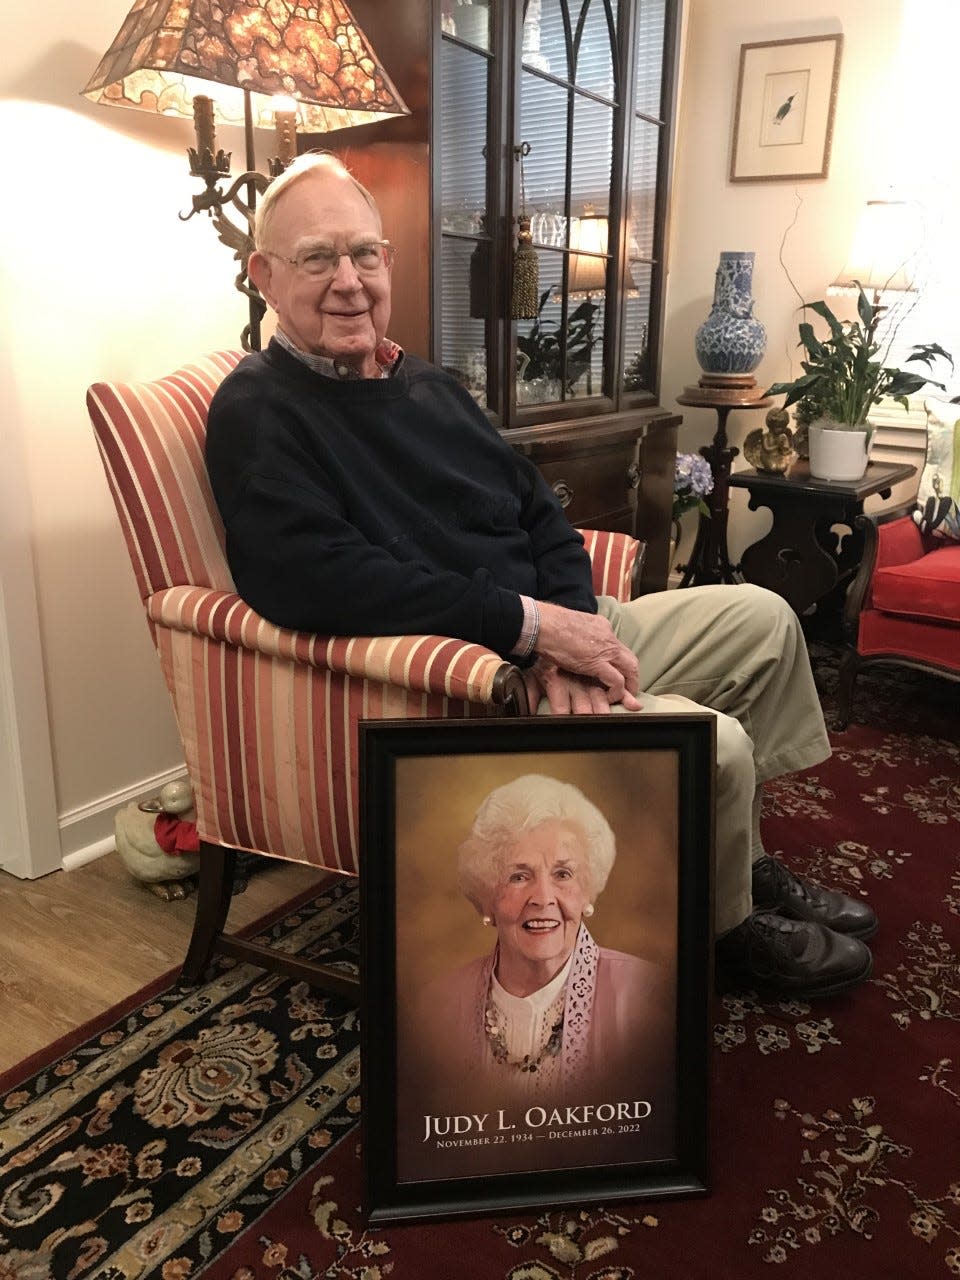 "She was just a plain amazing lady I was blessed to have for 68 years," said Art Oakford of his wife, Judy, who died Dec. 26.